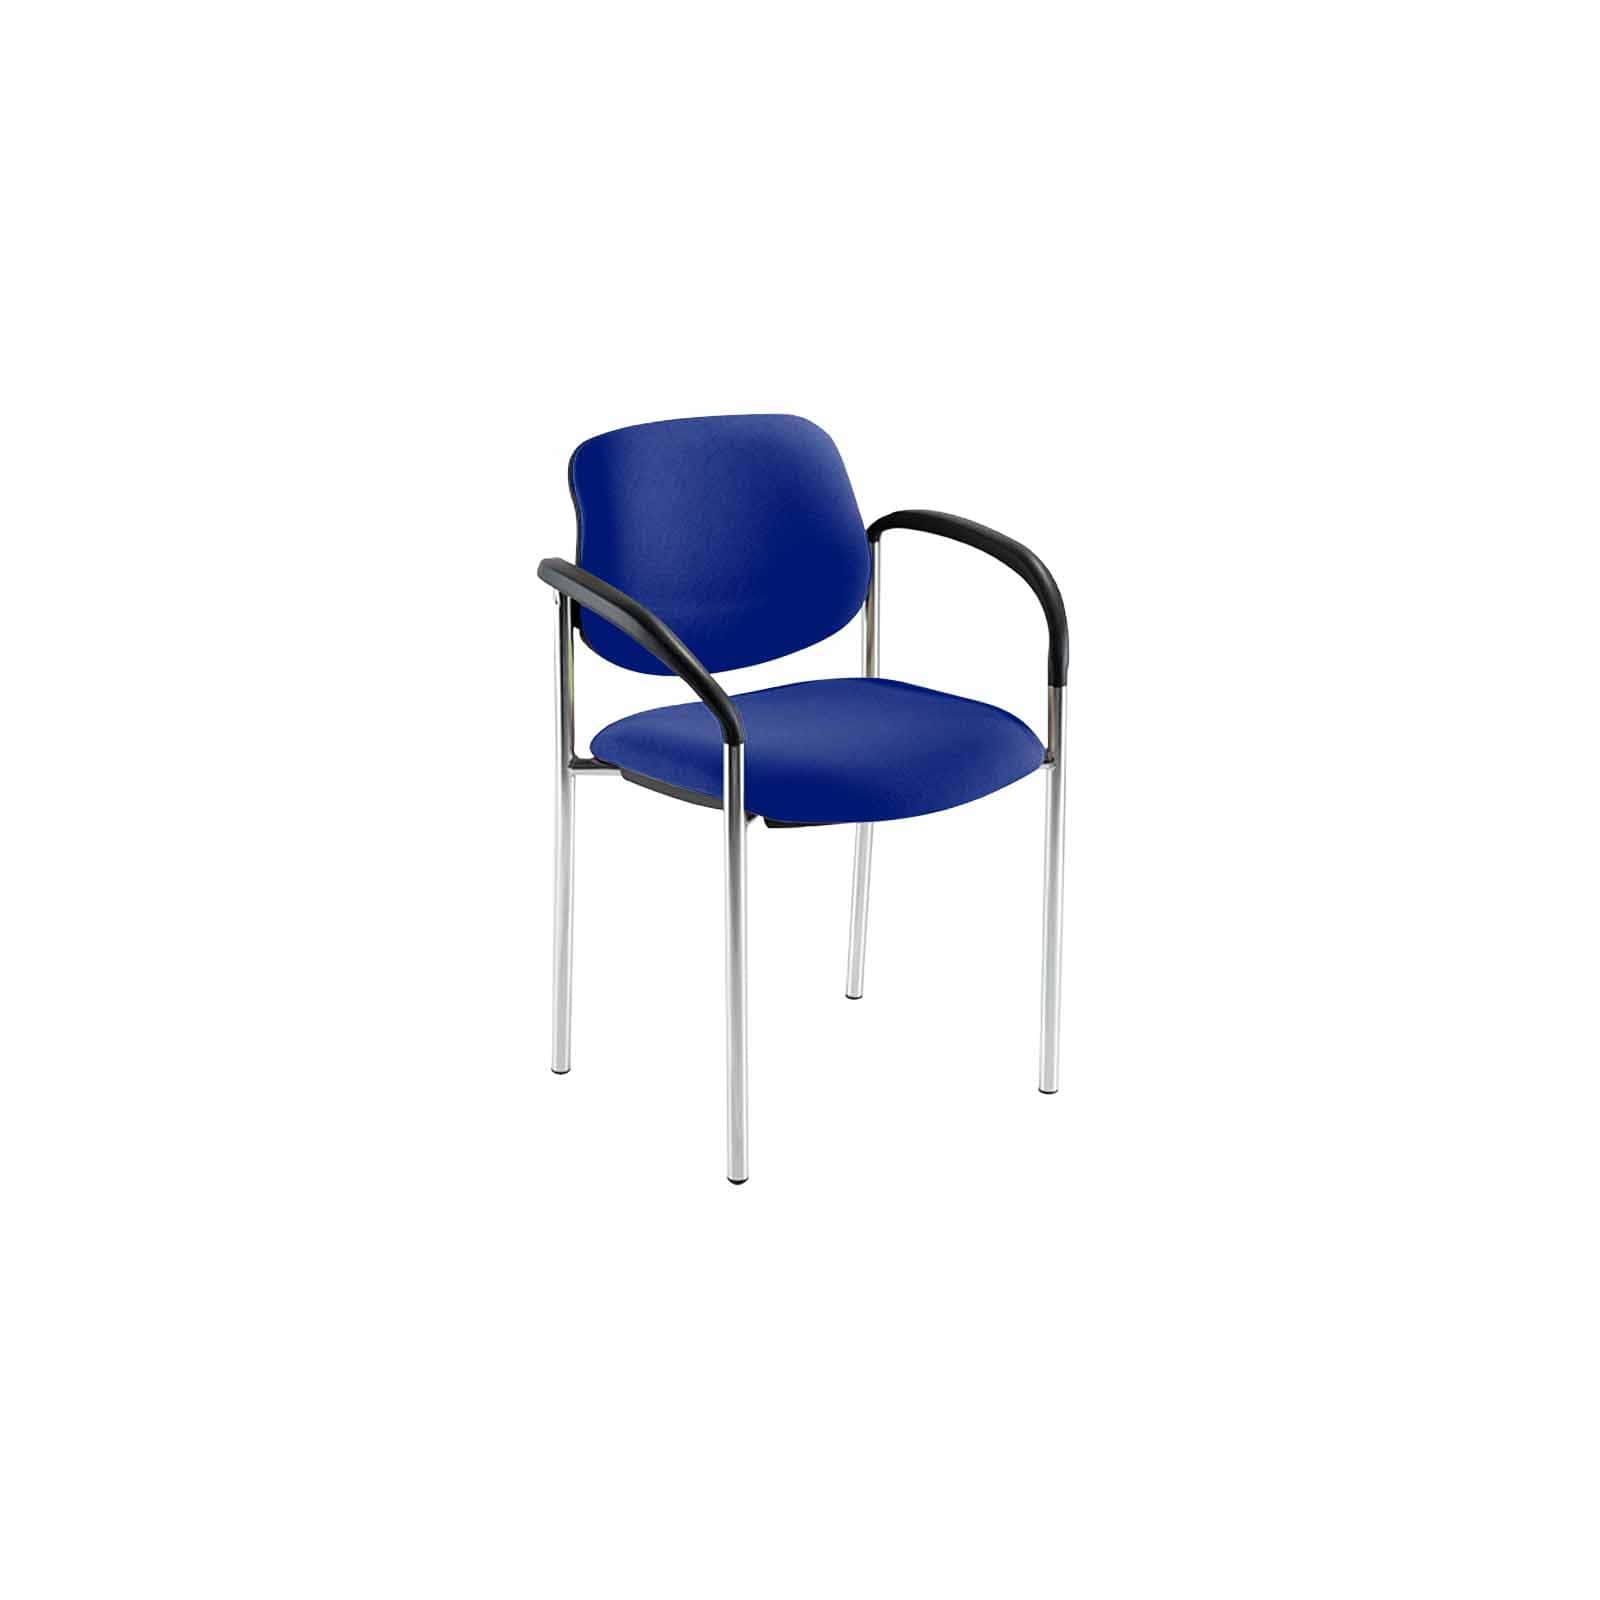 ELIN 4 Legged Meeting Chair with Arms